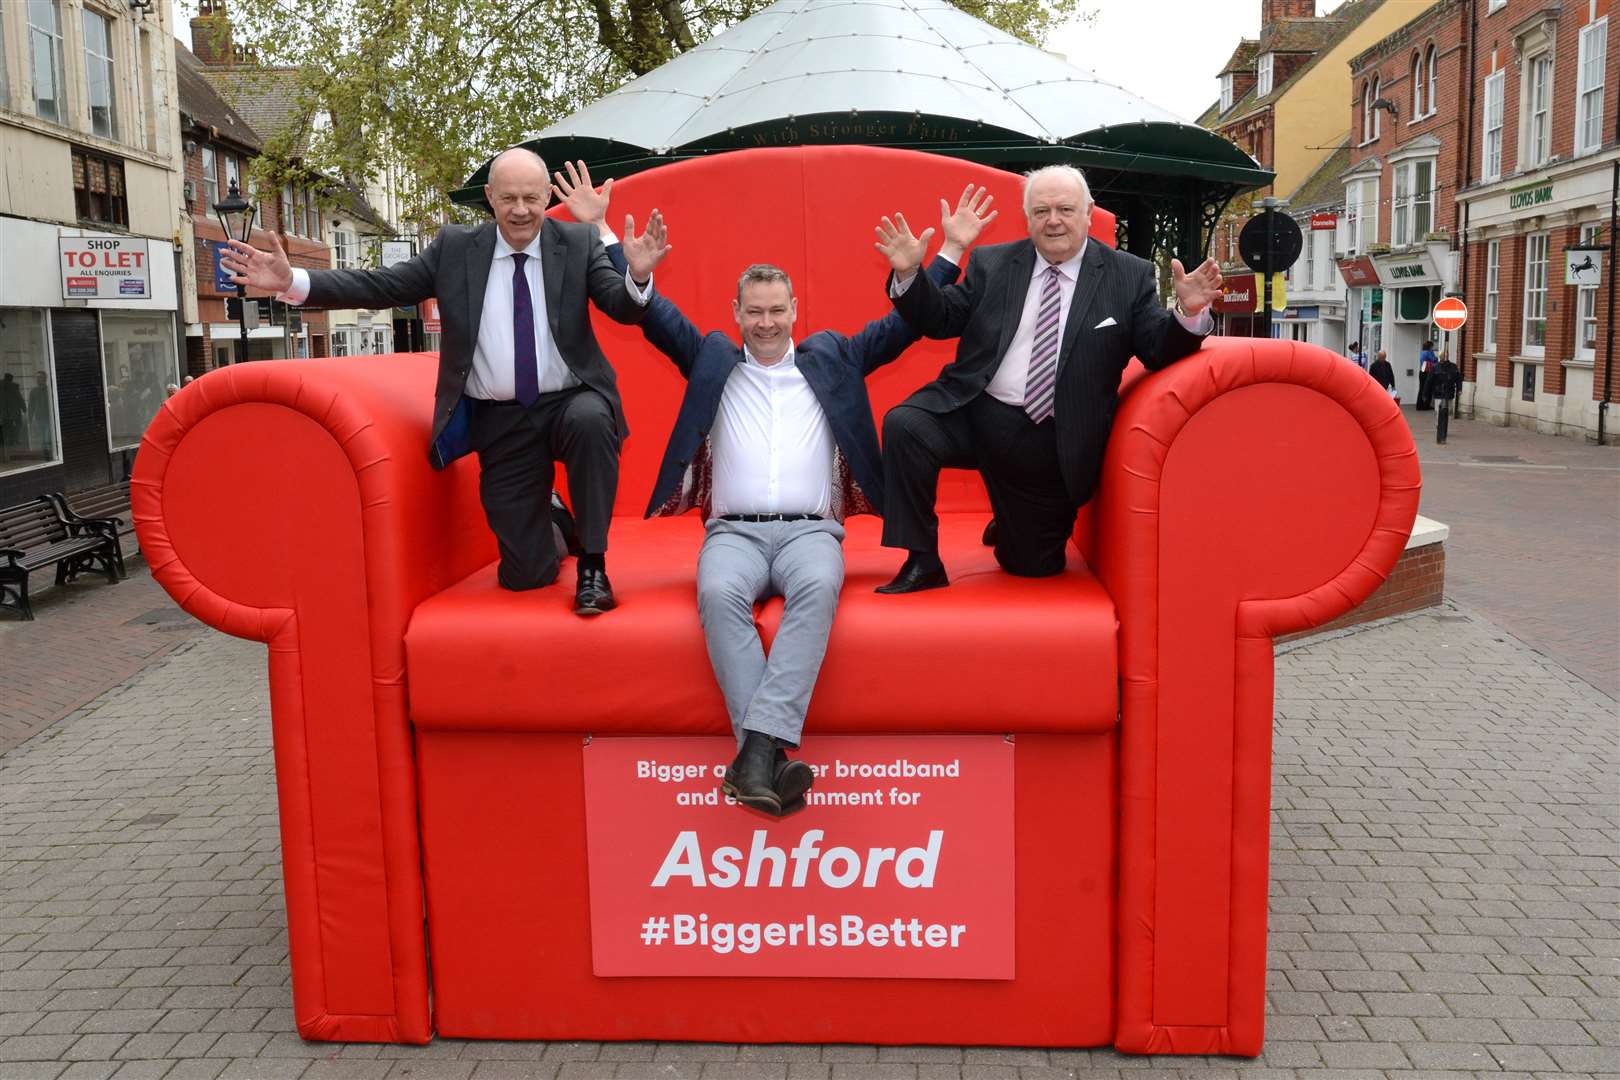 Ashford MP Damian Green, Virgin Media director Neil Bartholomew and council leader Gerry Clarkson sit on the giant red armchair